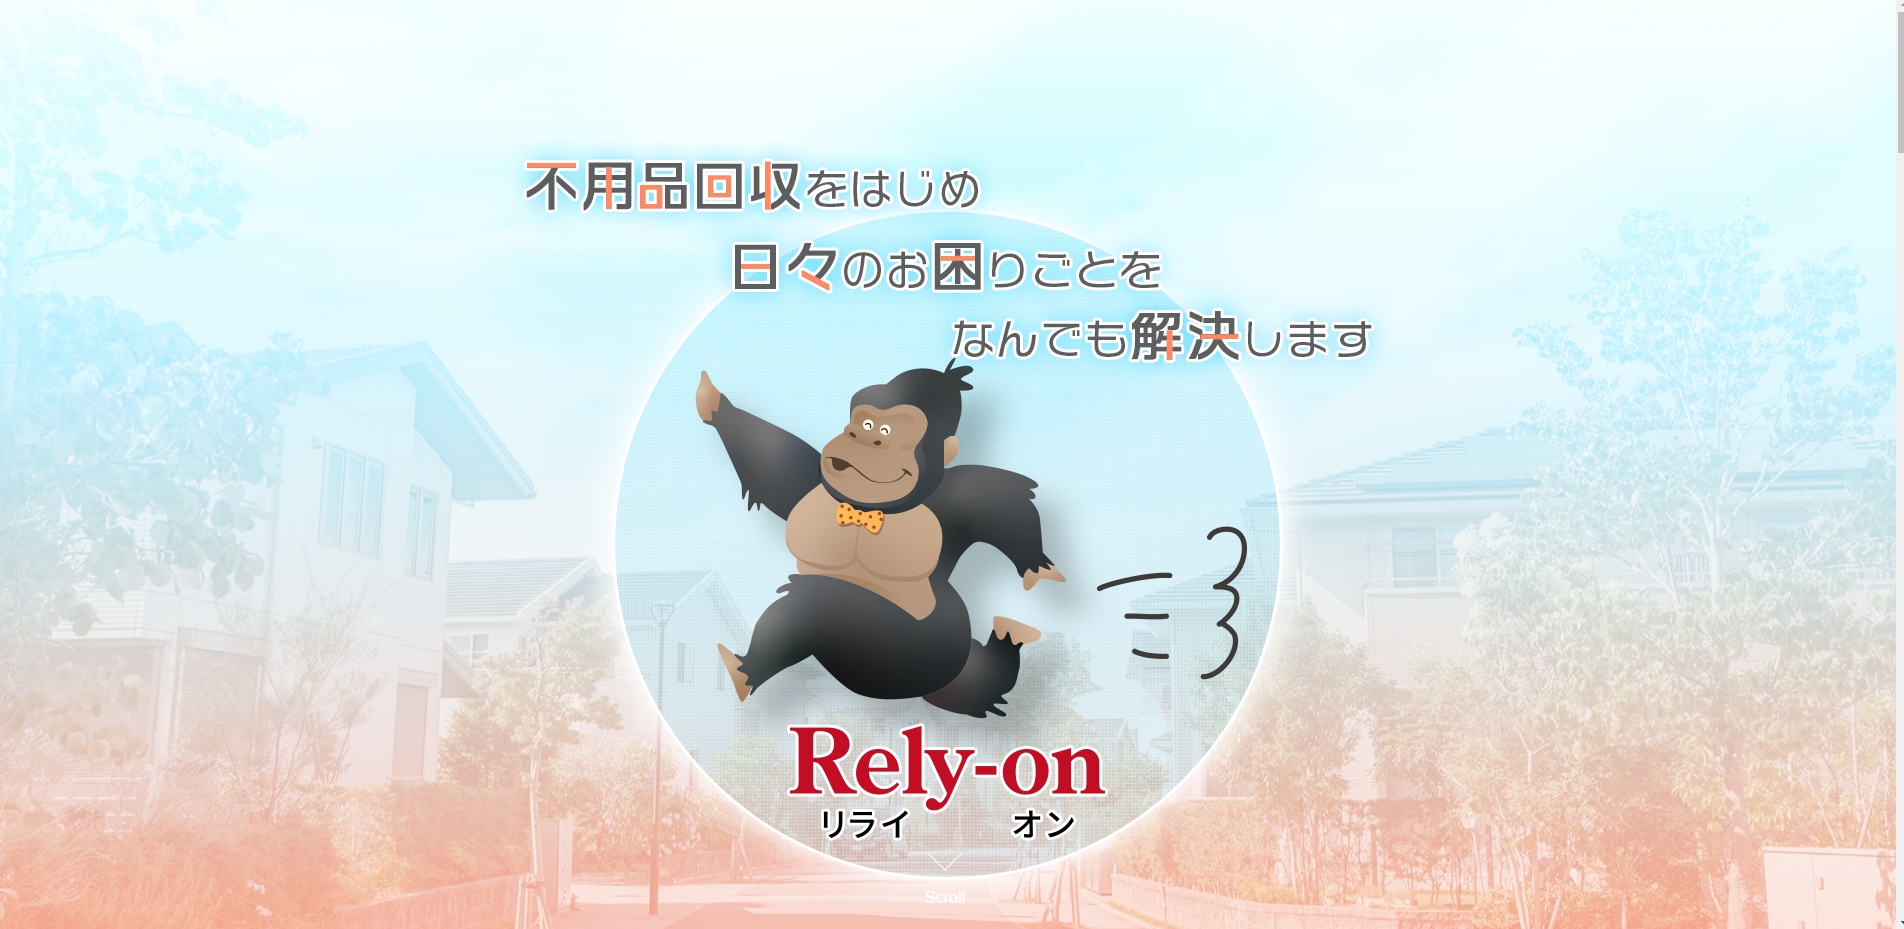 Rely-on